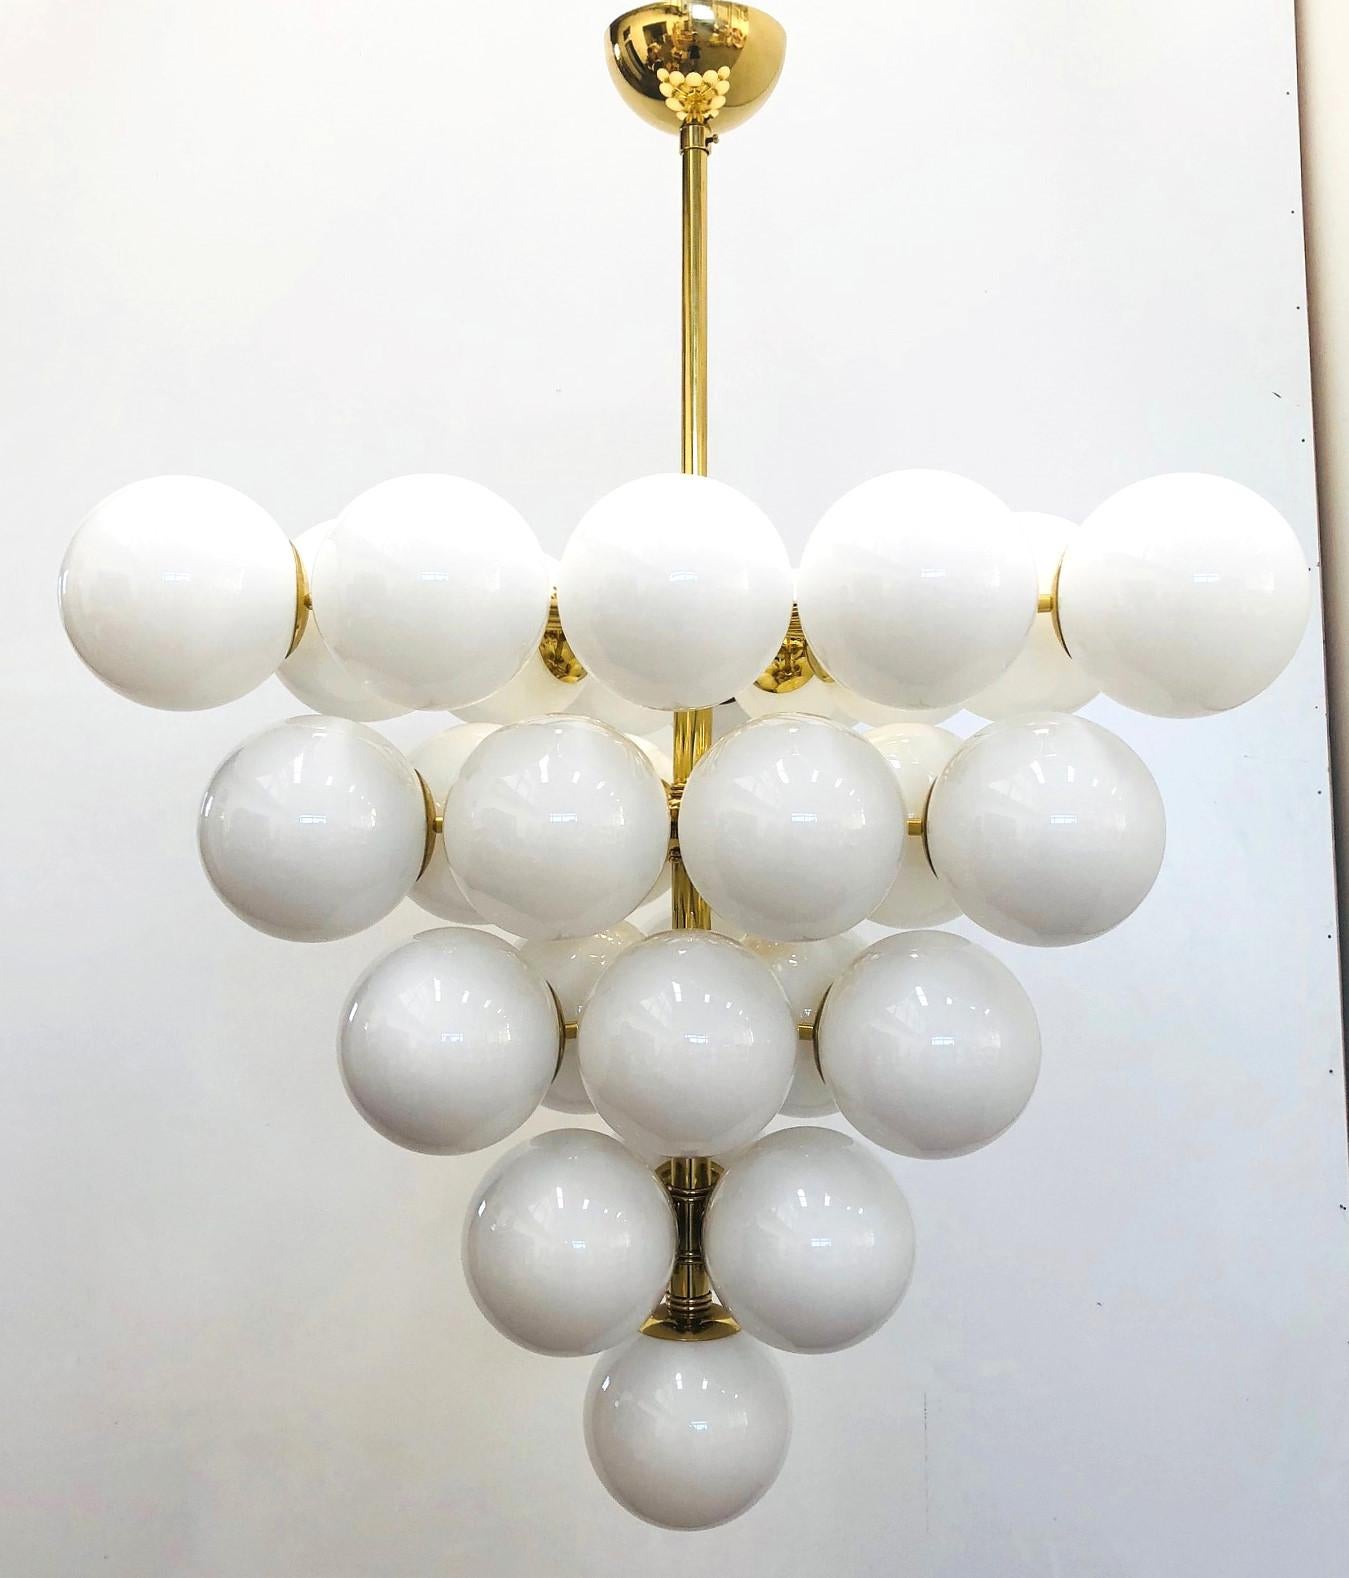 Italian chandelier with white Murano glass globes mounted on polished brass frame / Designed by Fabio Bergomi for Fabio Ltd / Made in Italy
31 lights / E12 or E14 type / max 40W each
Diameter: 31.5 inches / Height: 31.5 inches not including rod and